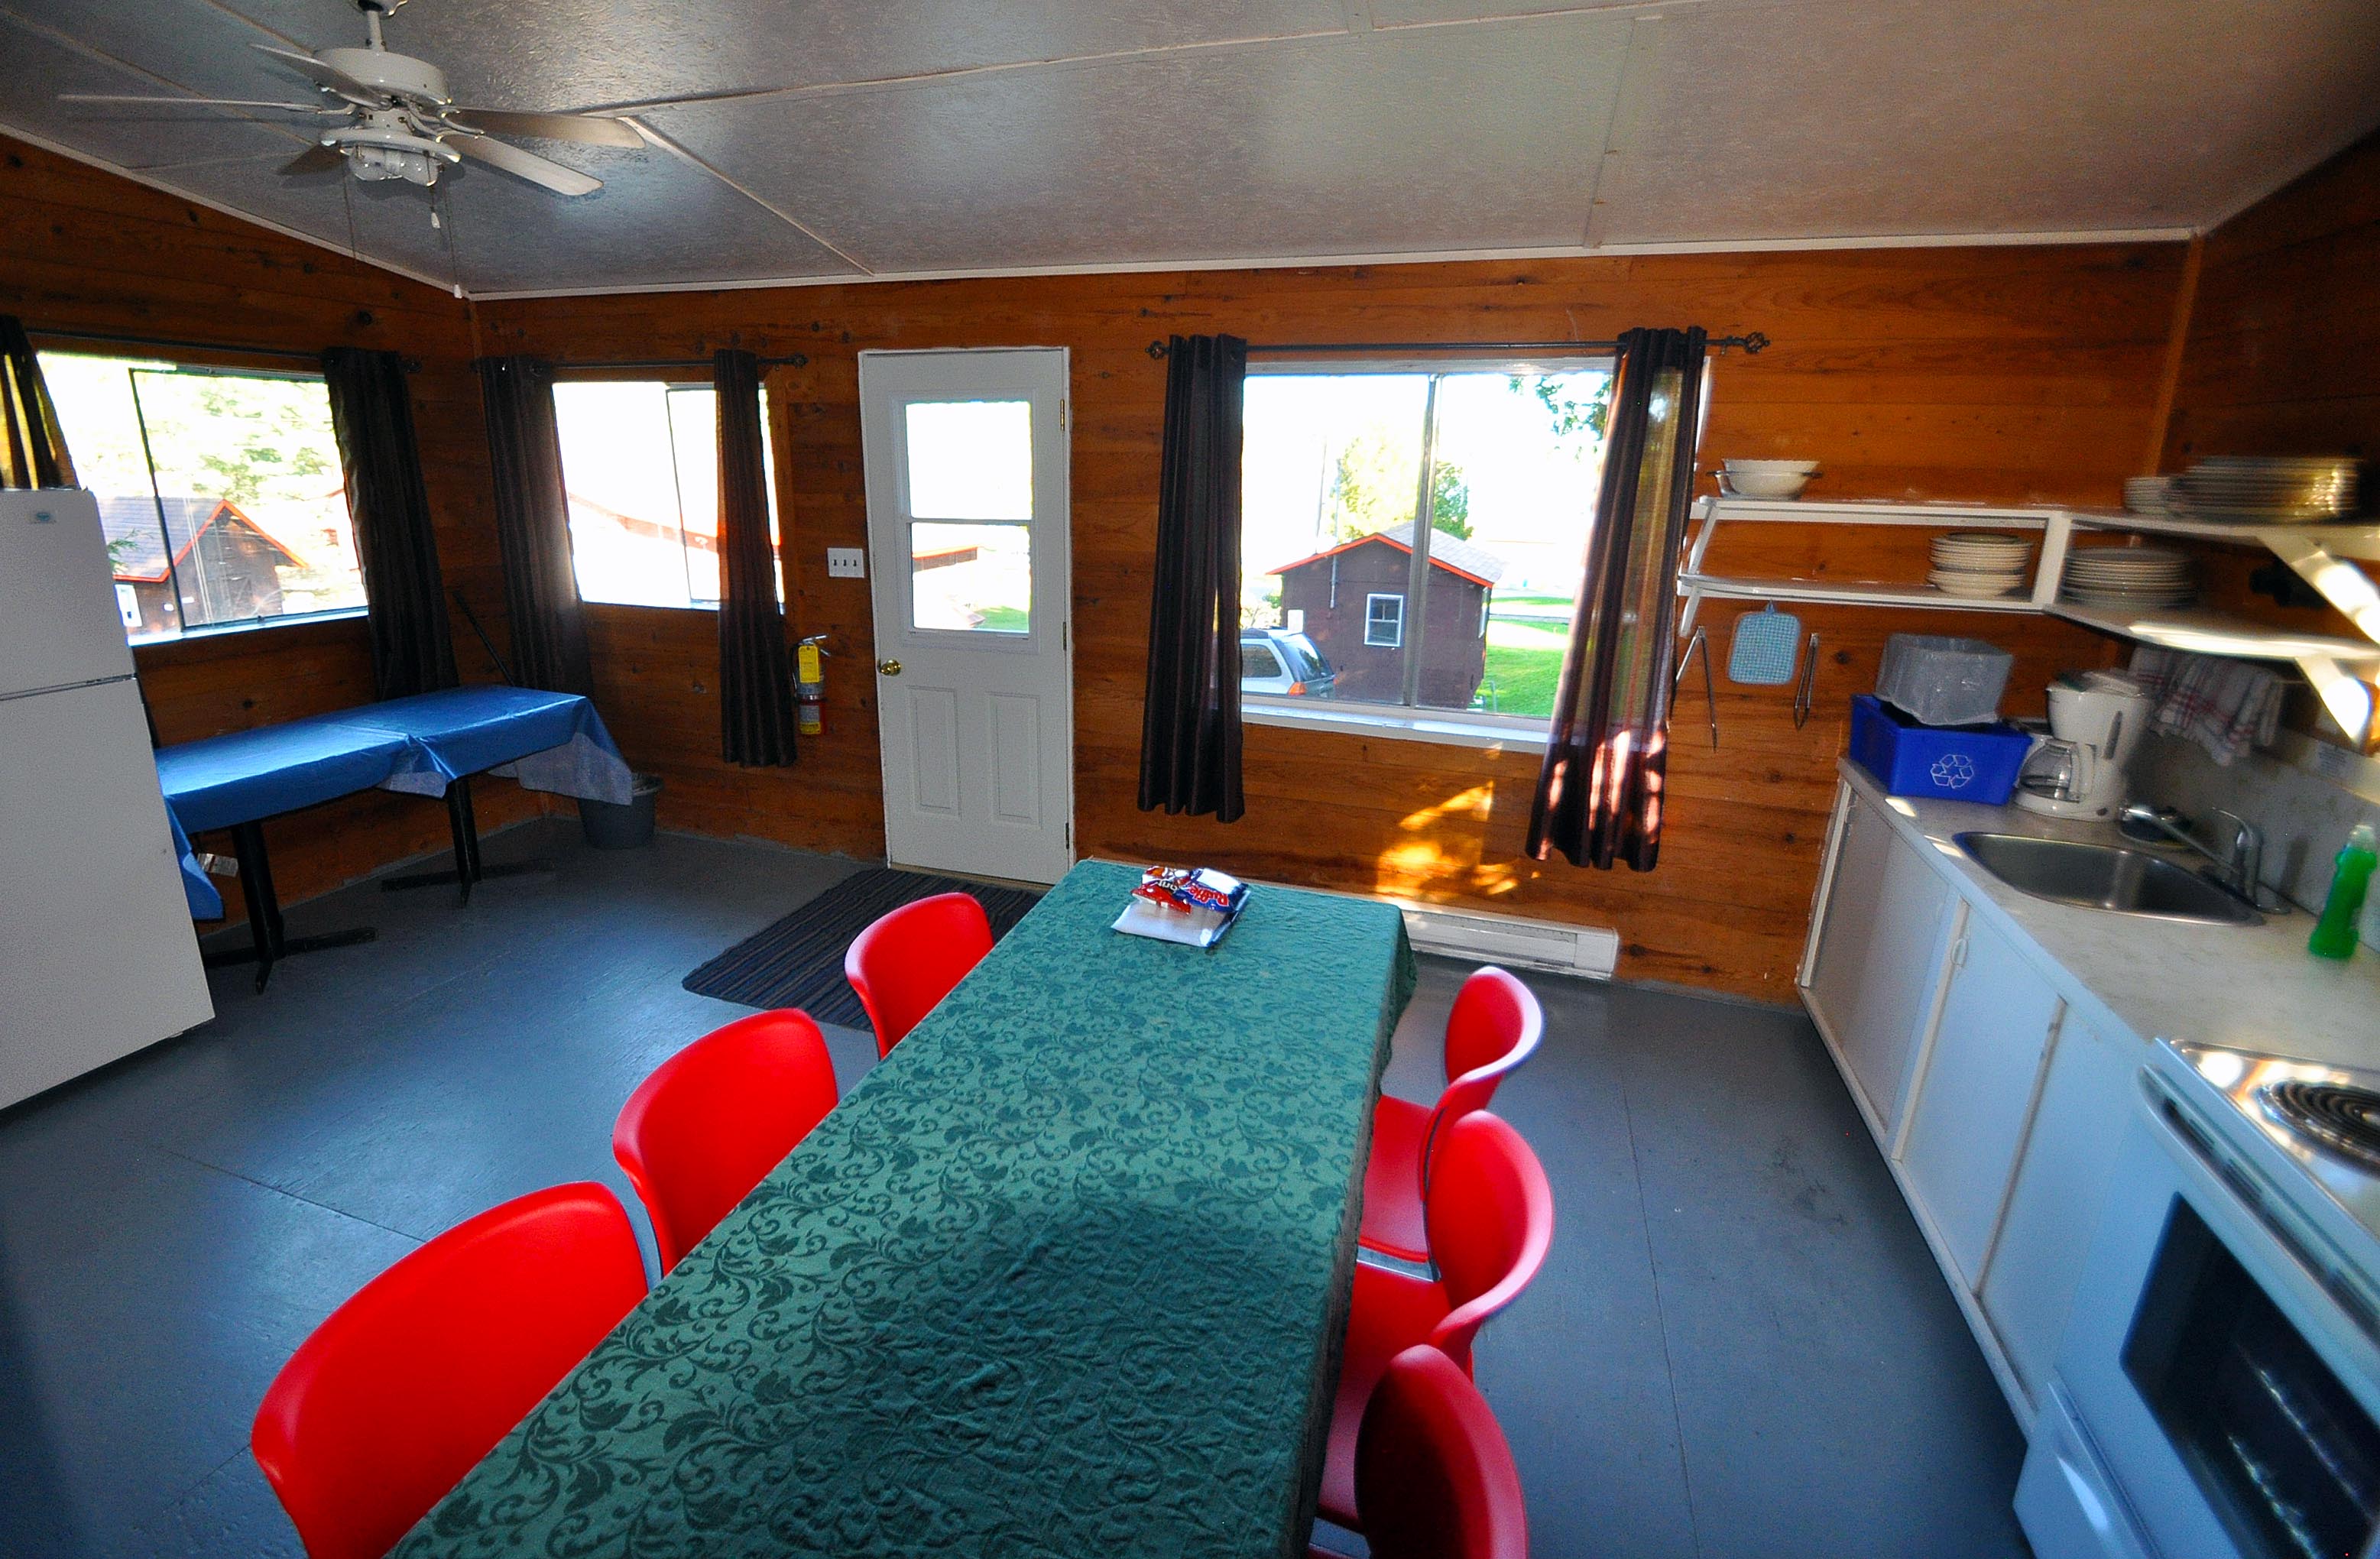 Cabin 15 - kitchen and dining table.